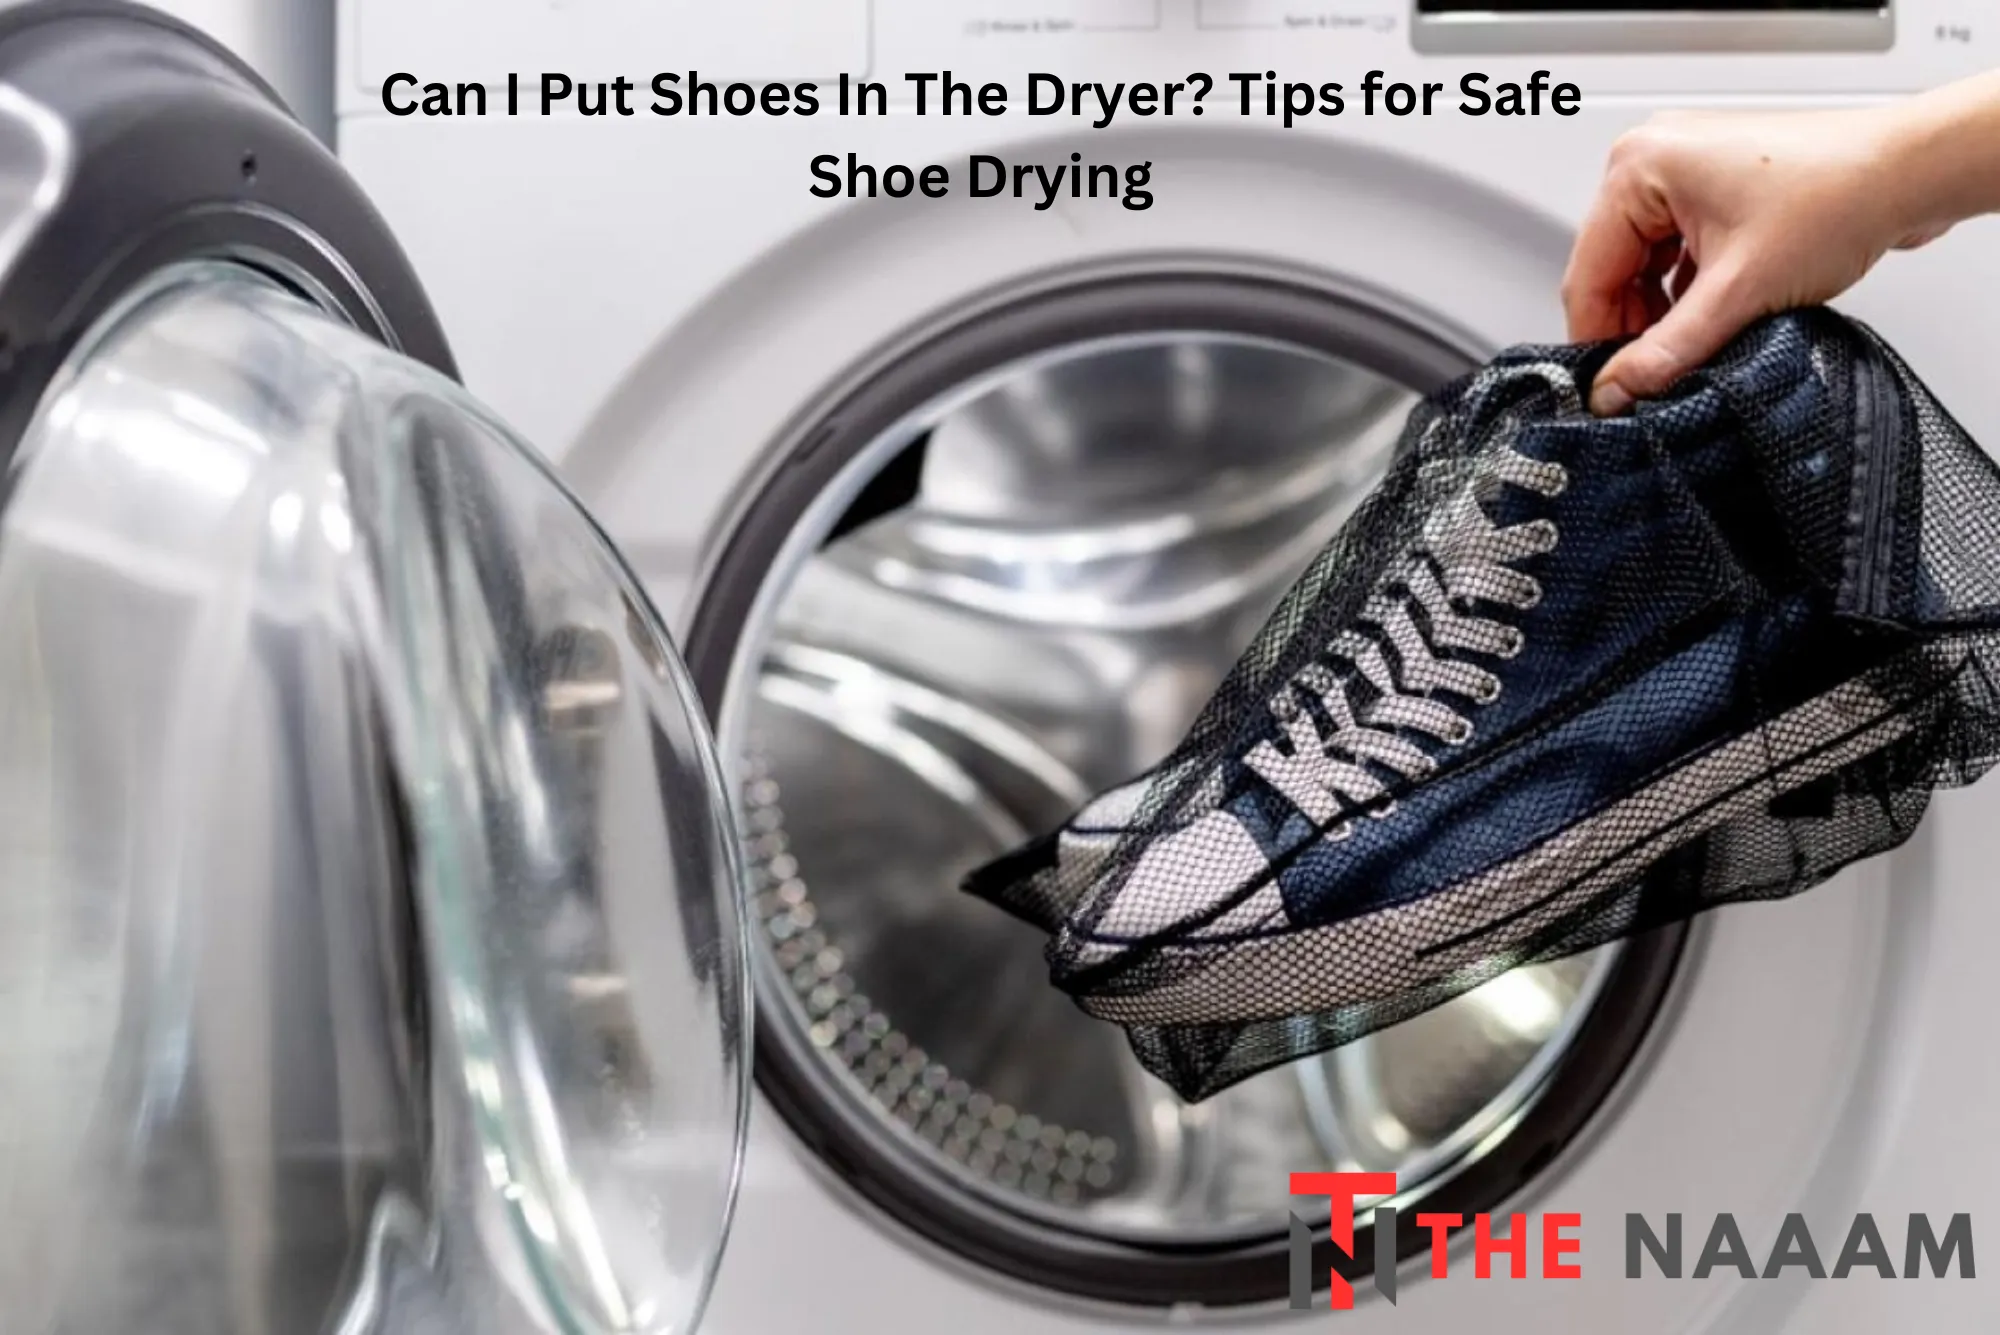 Can I Put Shoes In The Dryer? Tips for Safe Shoe Drying